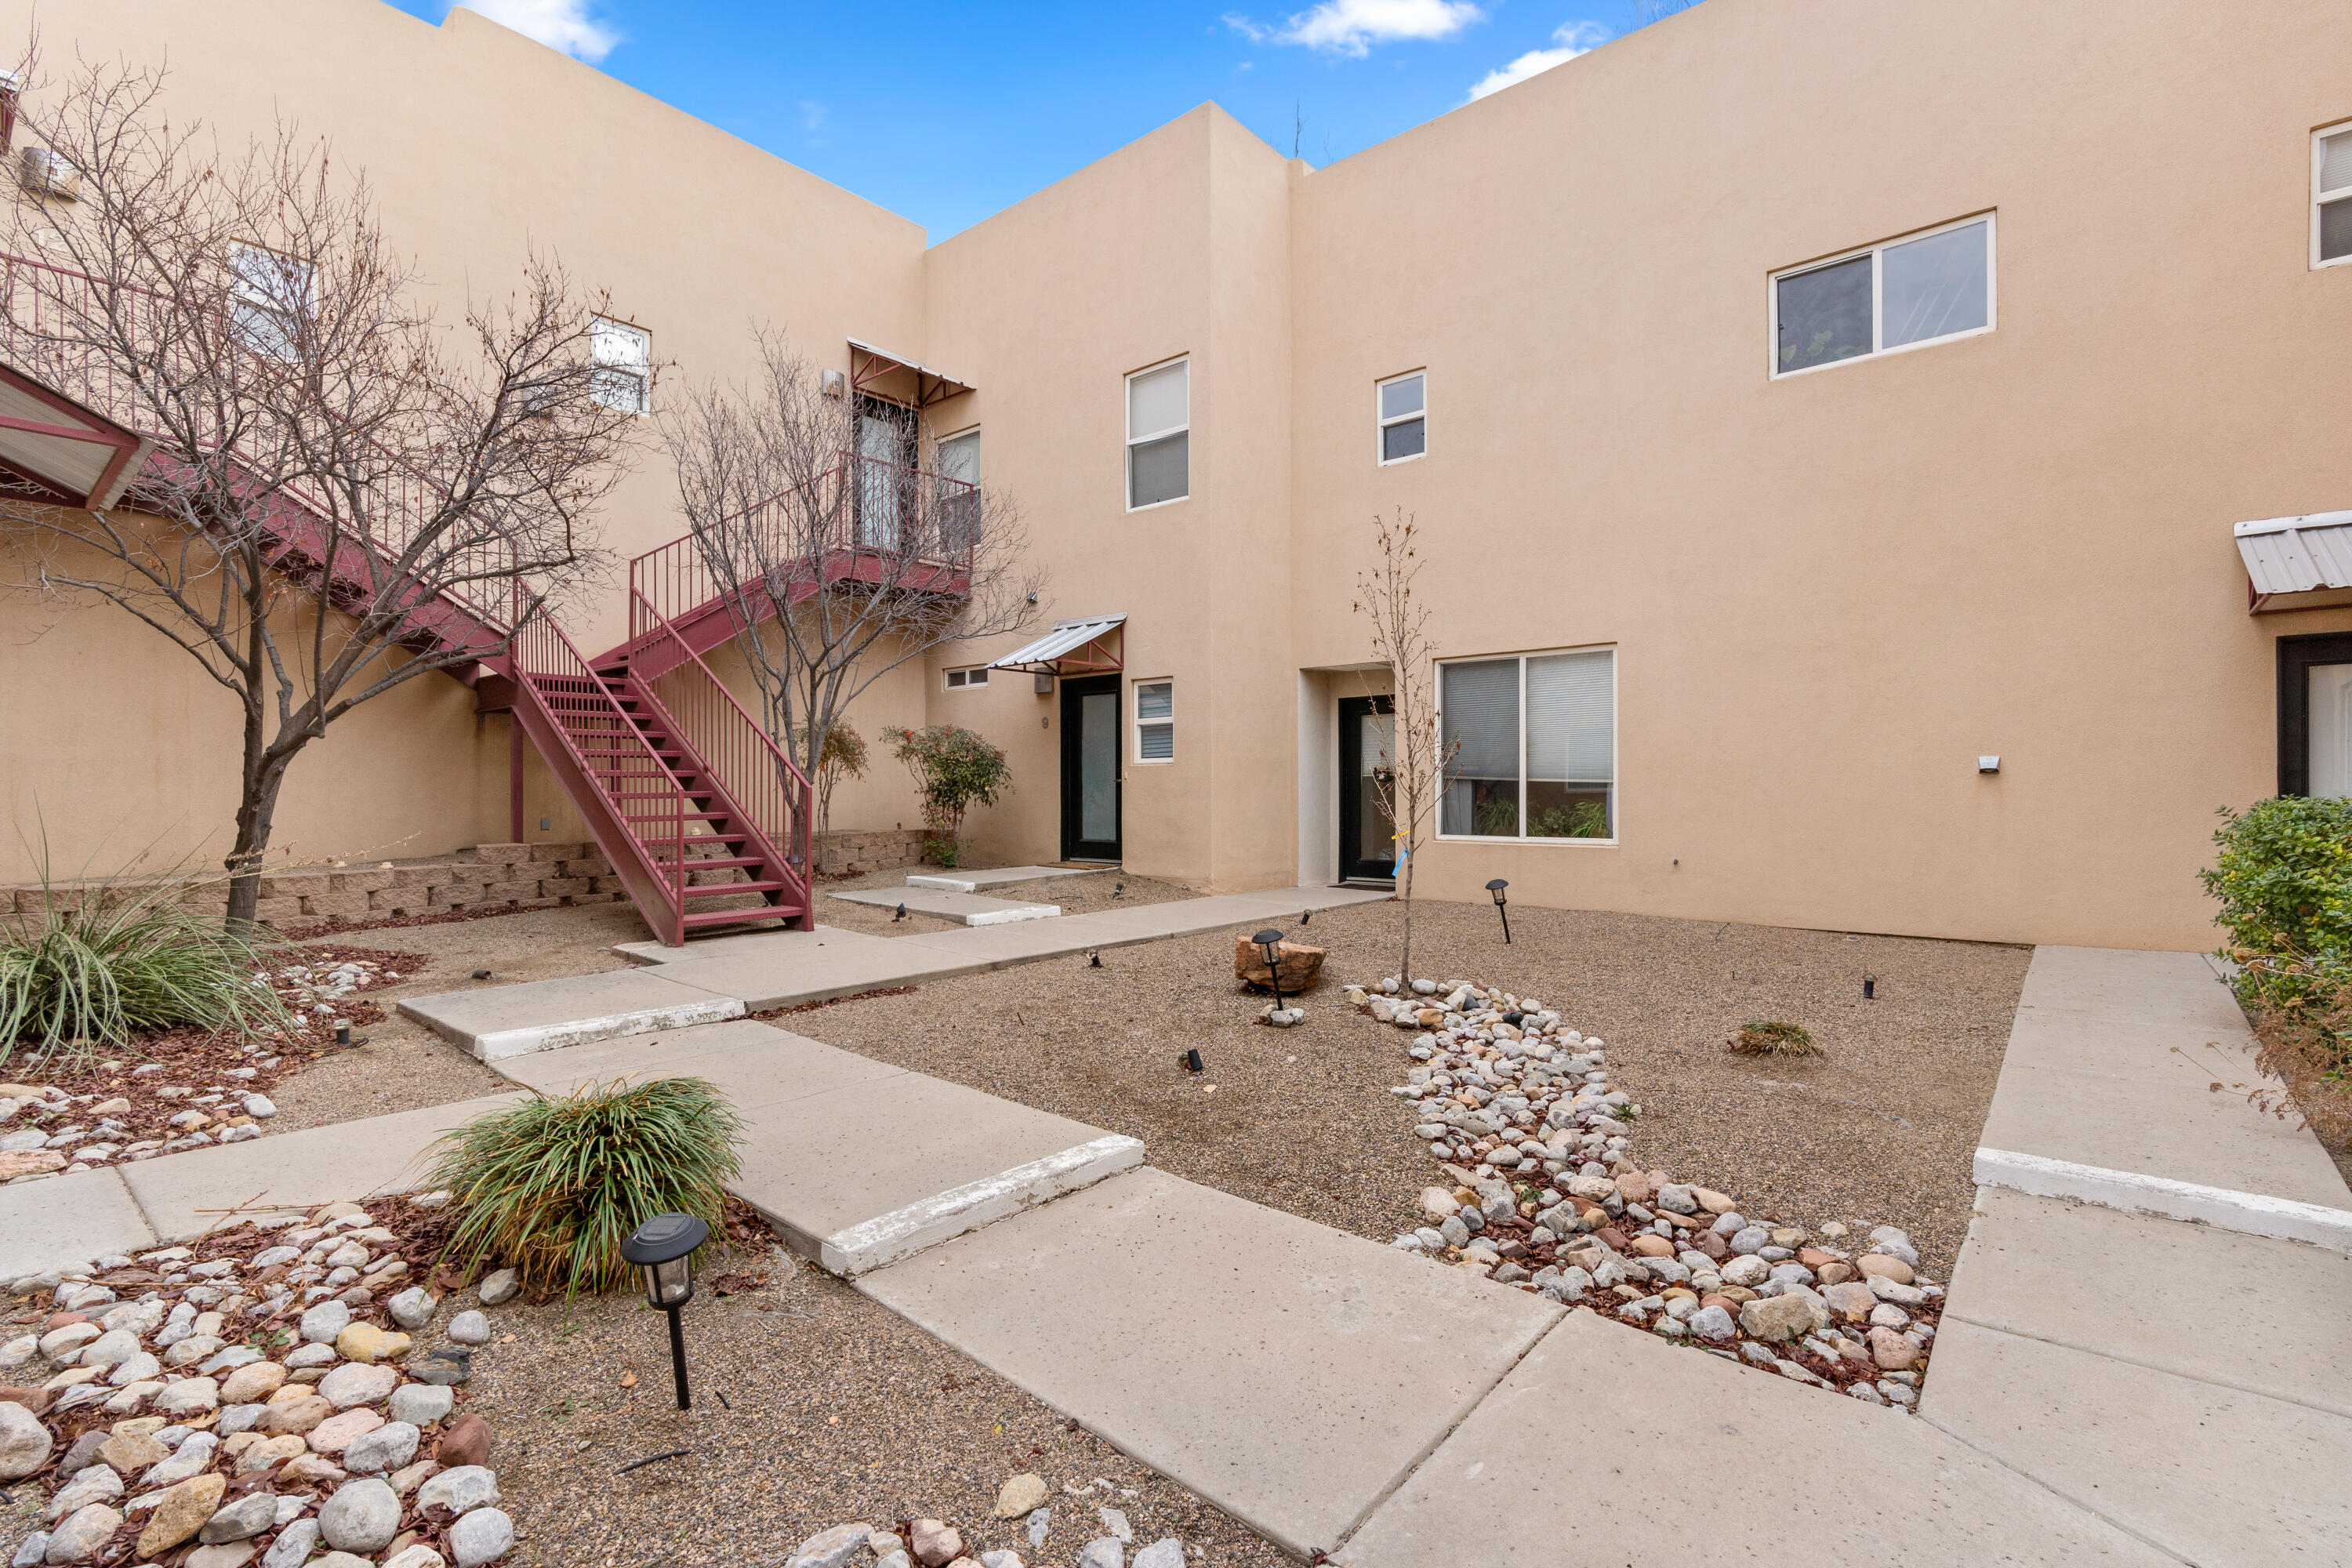 This modern and upscale condo is for sale in the heart of downtown! Bright and airy, this loft boasts high ceilings with gorgeous natural lighting. A short distance to UNM with easy access to the freeway.  Perfect location for college students and traveling nurses/doctors. Includes one parking space with on-site parking. Come see this investment opportunity or first home for yourself in this private, gated community.